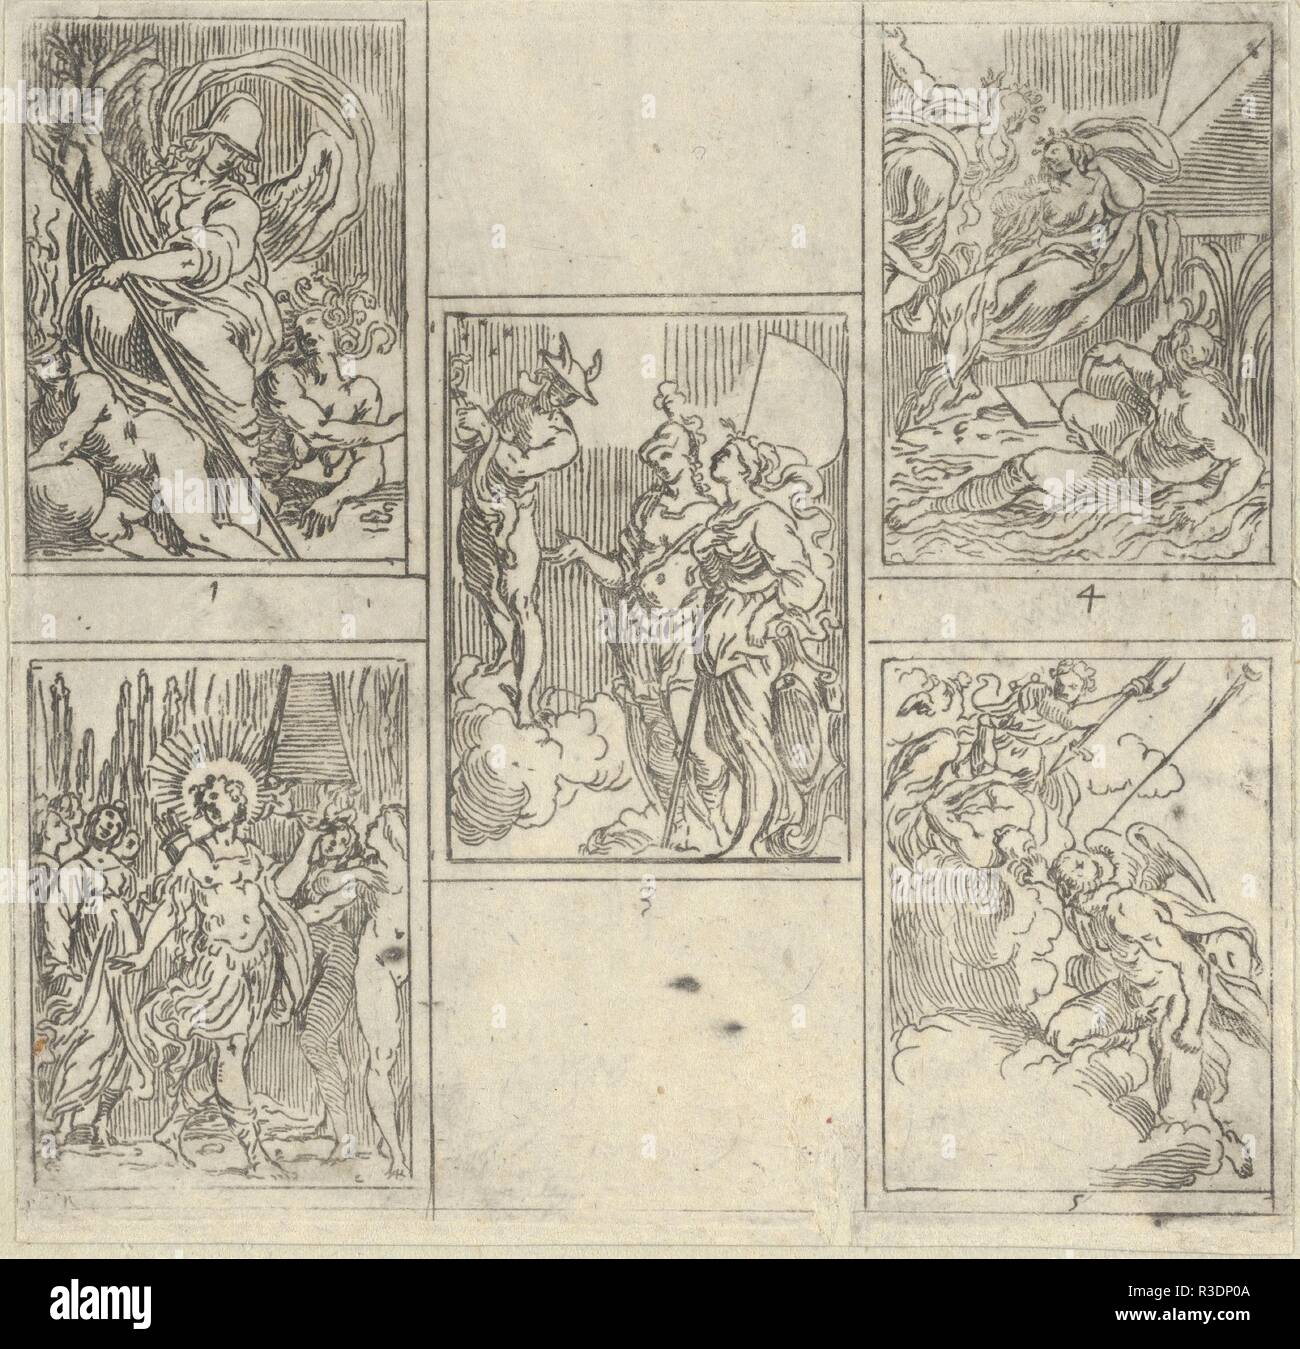 Five numbered scenes, each after a painter in the Accademia Degl'Incamminati, from IL FUNERALE D'AGOSTINO CARRACCIO FATTO IN BOLOGNA SUA PATRIA DAGL'INCAMINATI Academici del Disegno: 1. Virtue vanquishing Envy and Fortune, painted by Giulio Cesare Parigino; 2. Apollo and the Muses at the tomb of Agostino Carracci, painted by Luigi Valesio; 3. Mercury pointing to a constellation with the personification of Painting and that of the city of Bologna, Felsina, painted by Aurelio Benelli; 4. Personification of Painting being comforted by Poetry, and the personification of a river at right, painted b Stock Photo